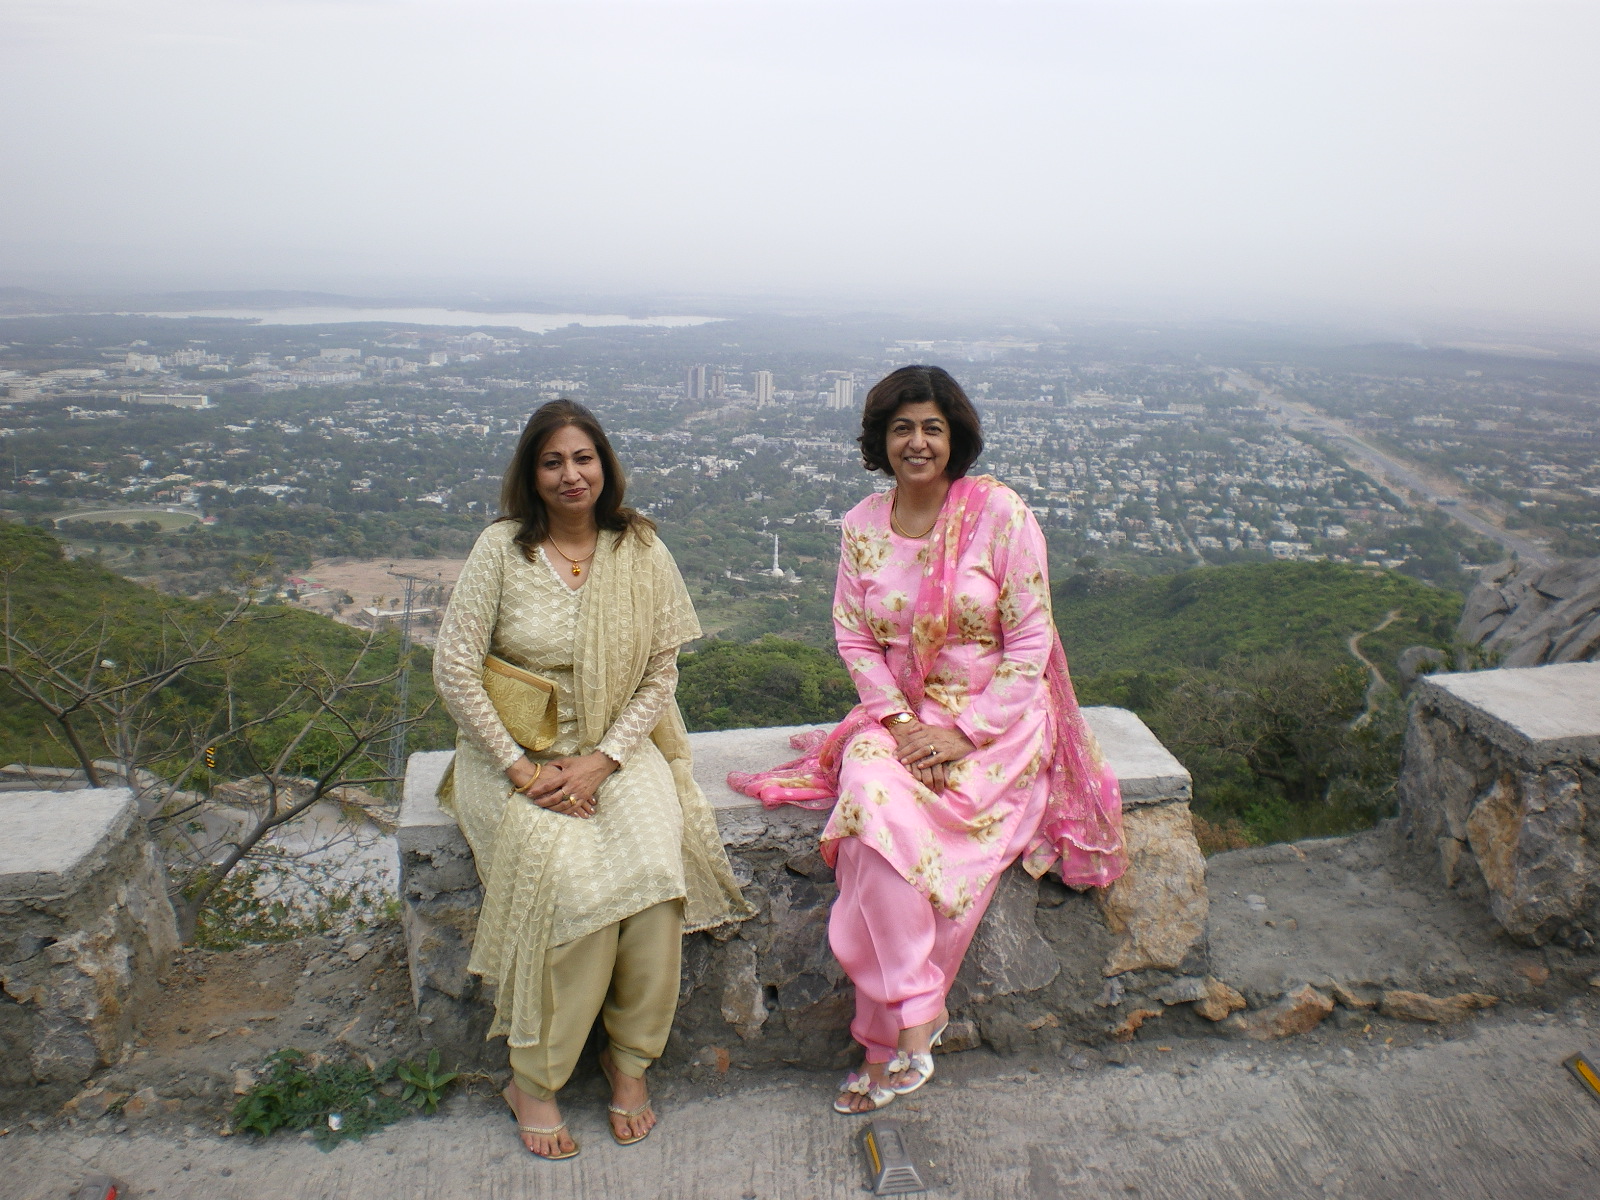 Overlooking the valley of Islamabad